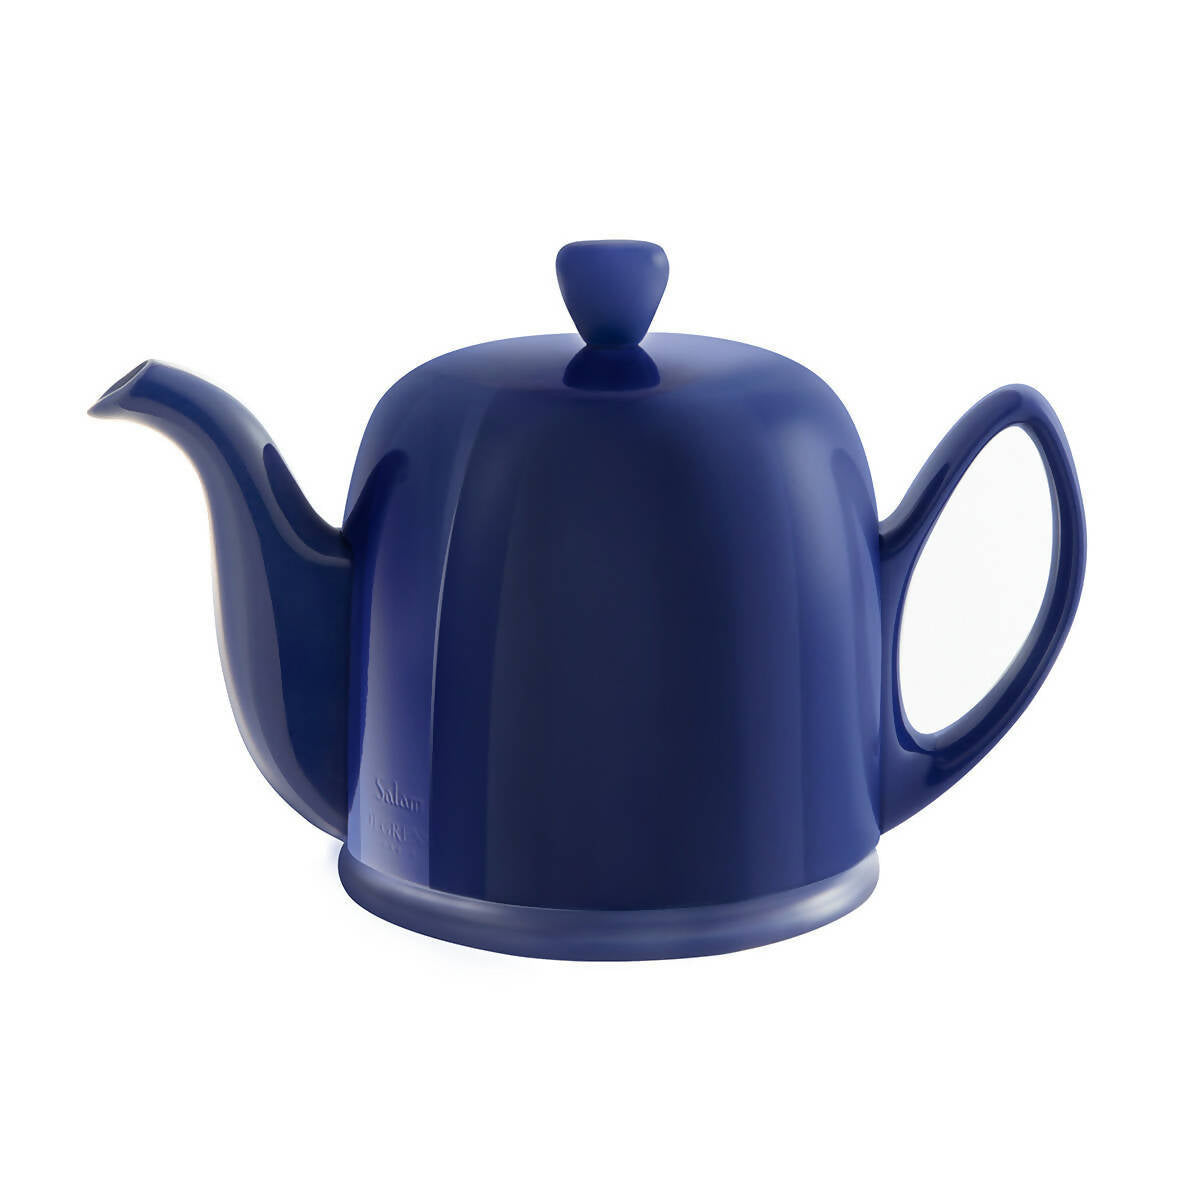 SALAM MONOCHROMATIC Teapot 4 or 6 Cups